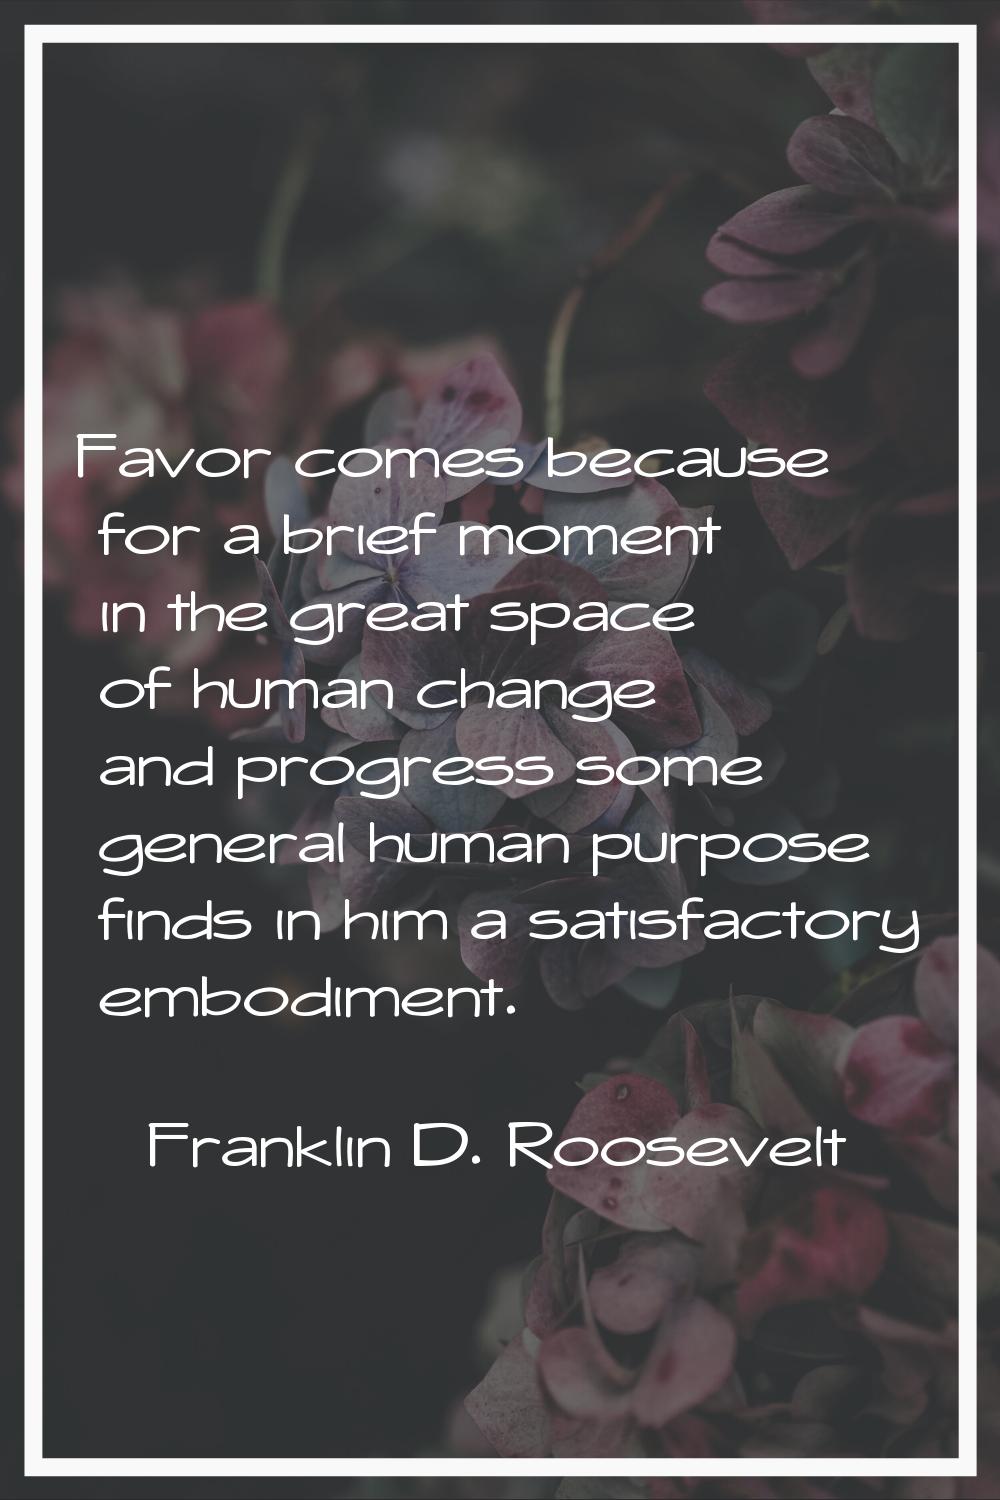 Favor comes because for a brief moment in the great space of human change and progress some general